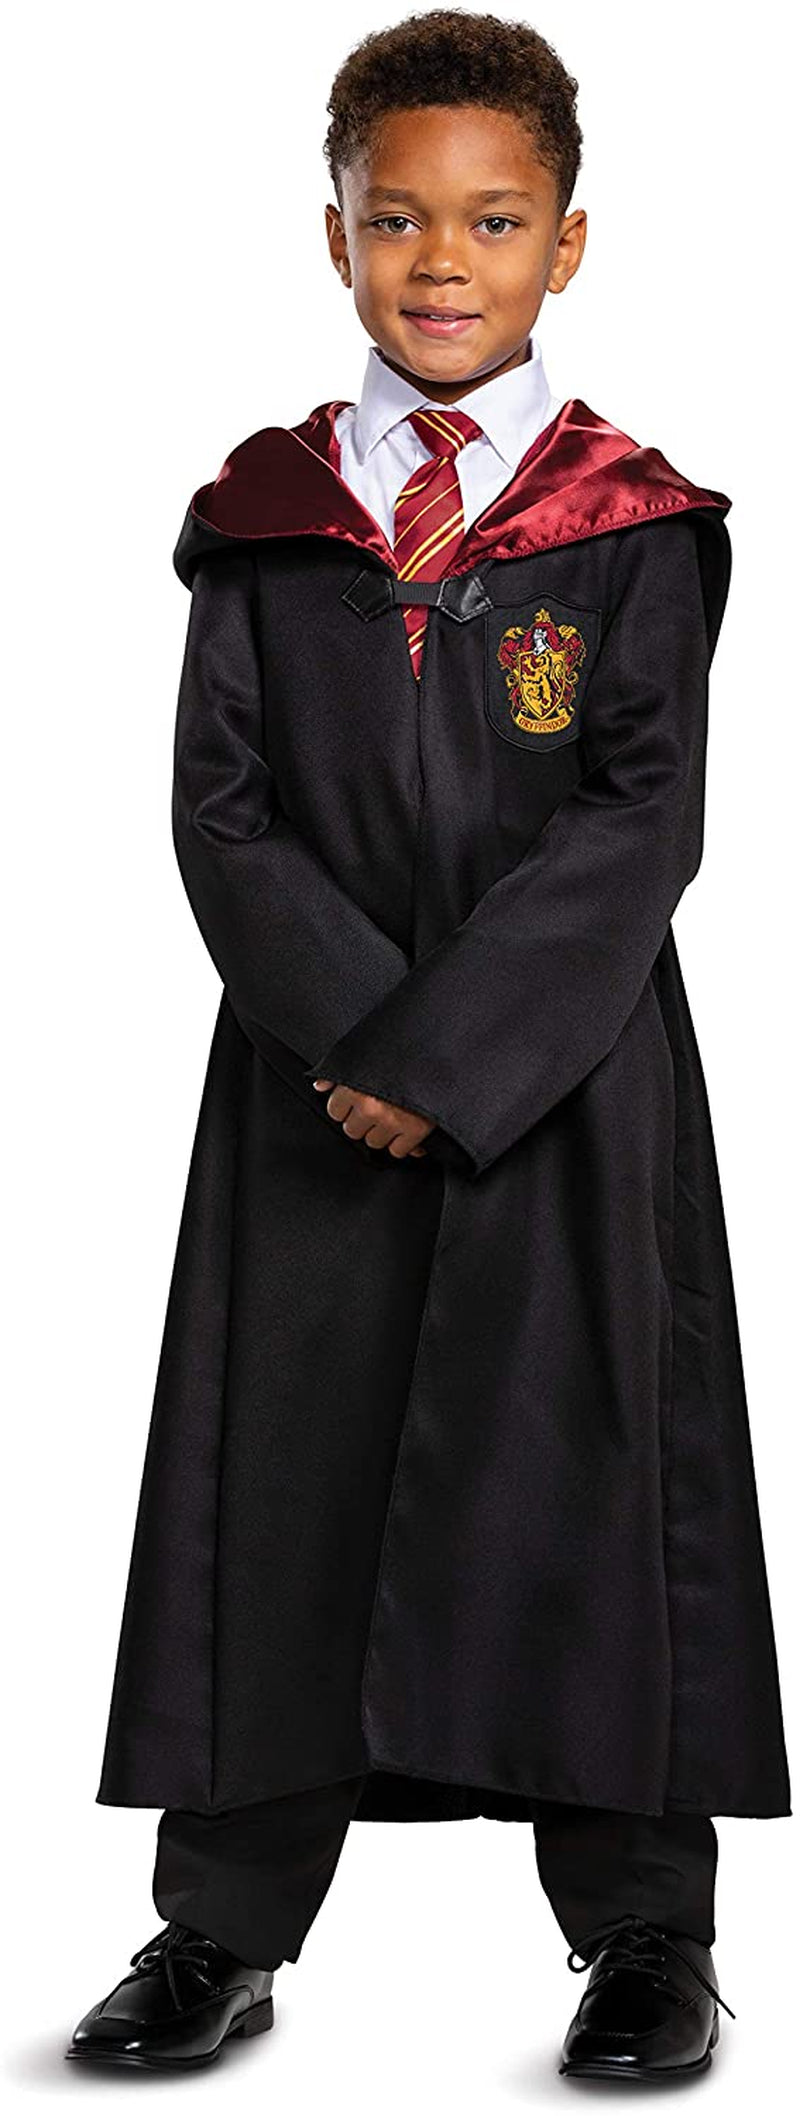 Harry Potter Robe, Official Hogwarts Wizarding World Costume Robes, Classic Kids Size Dress up Accessory  Disguise   